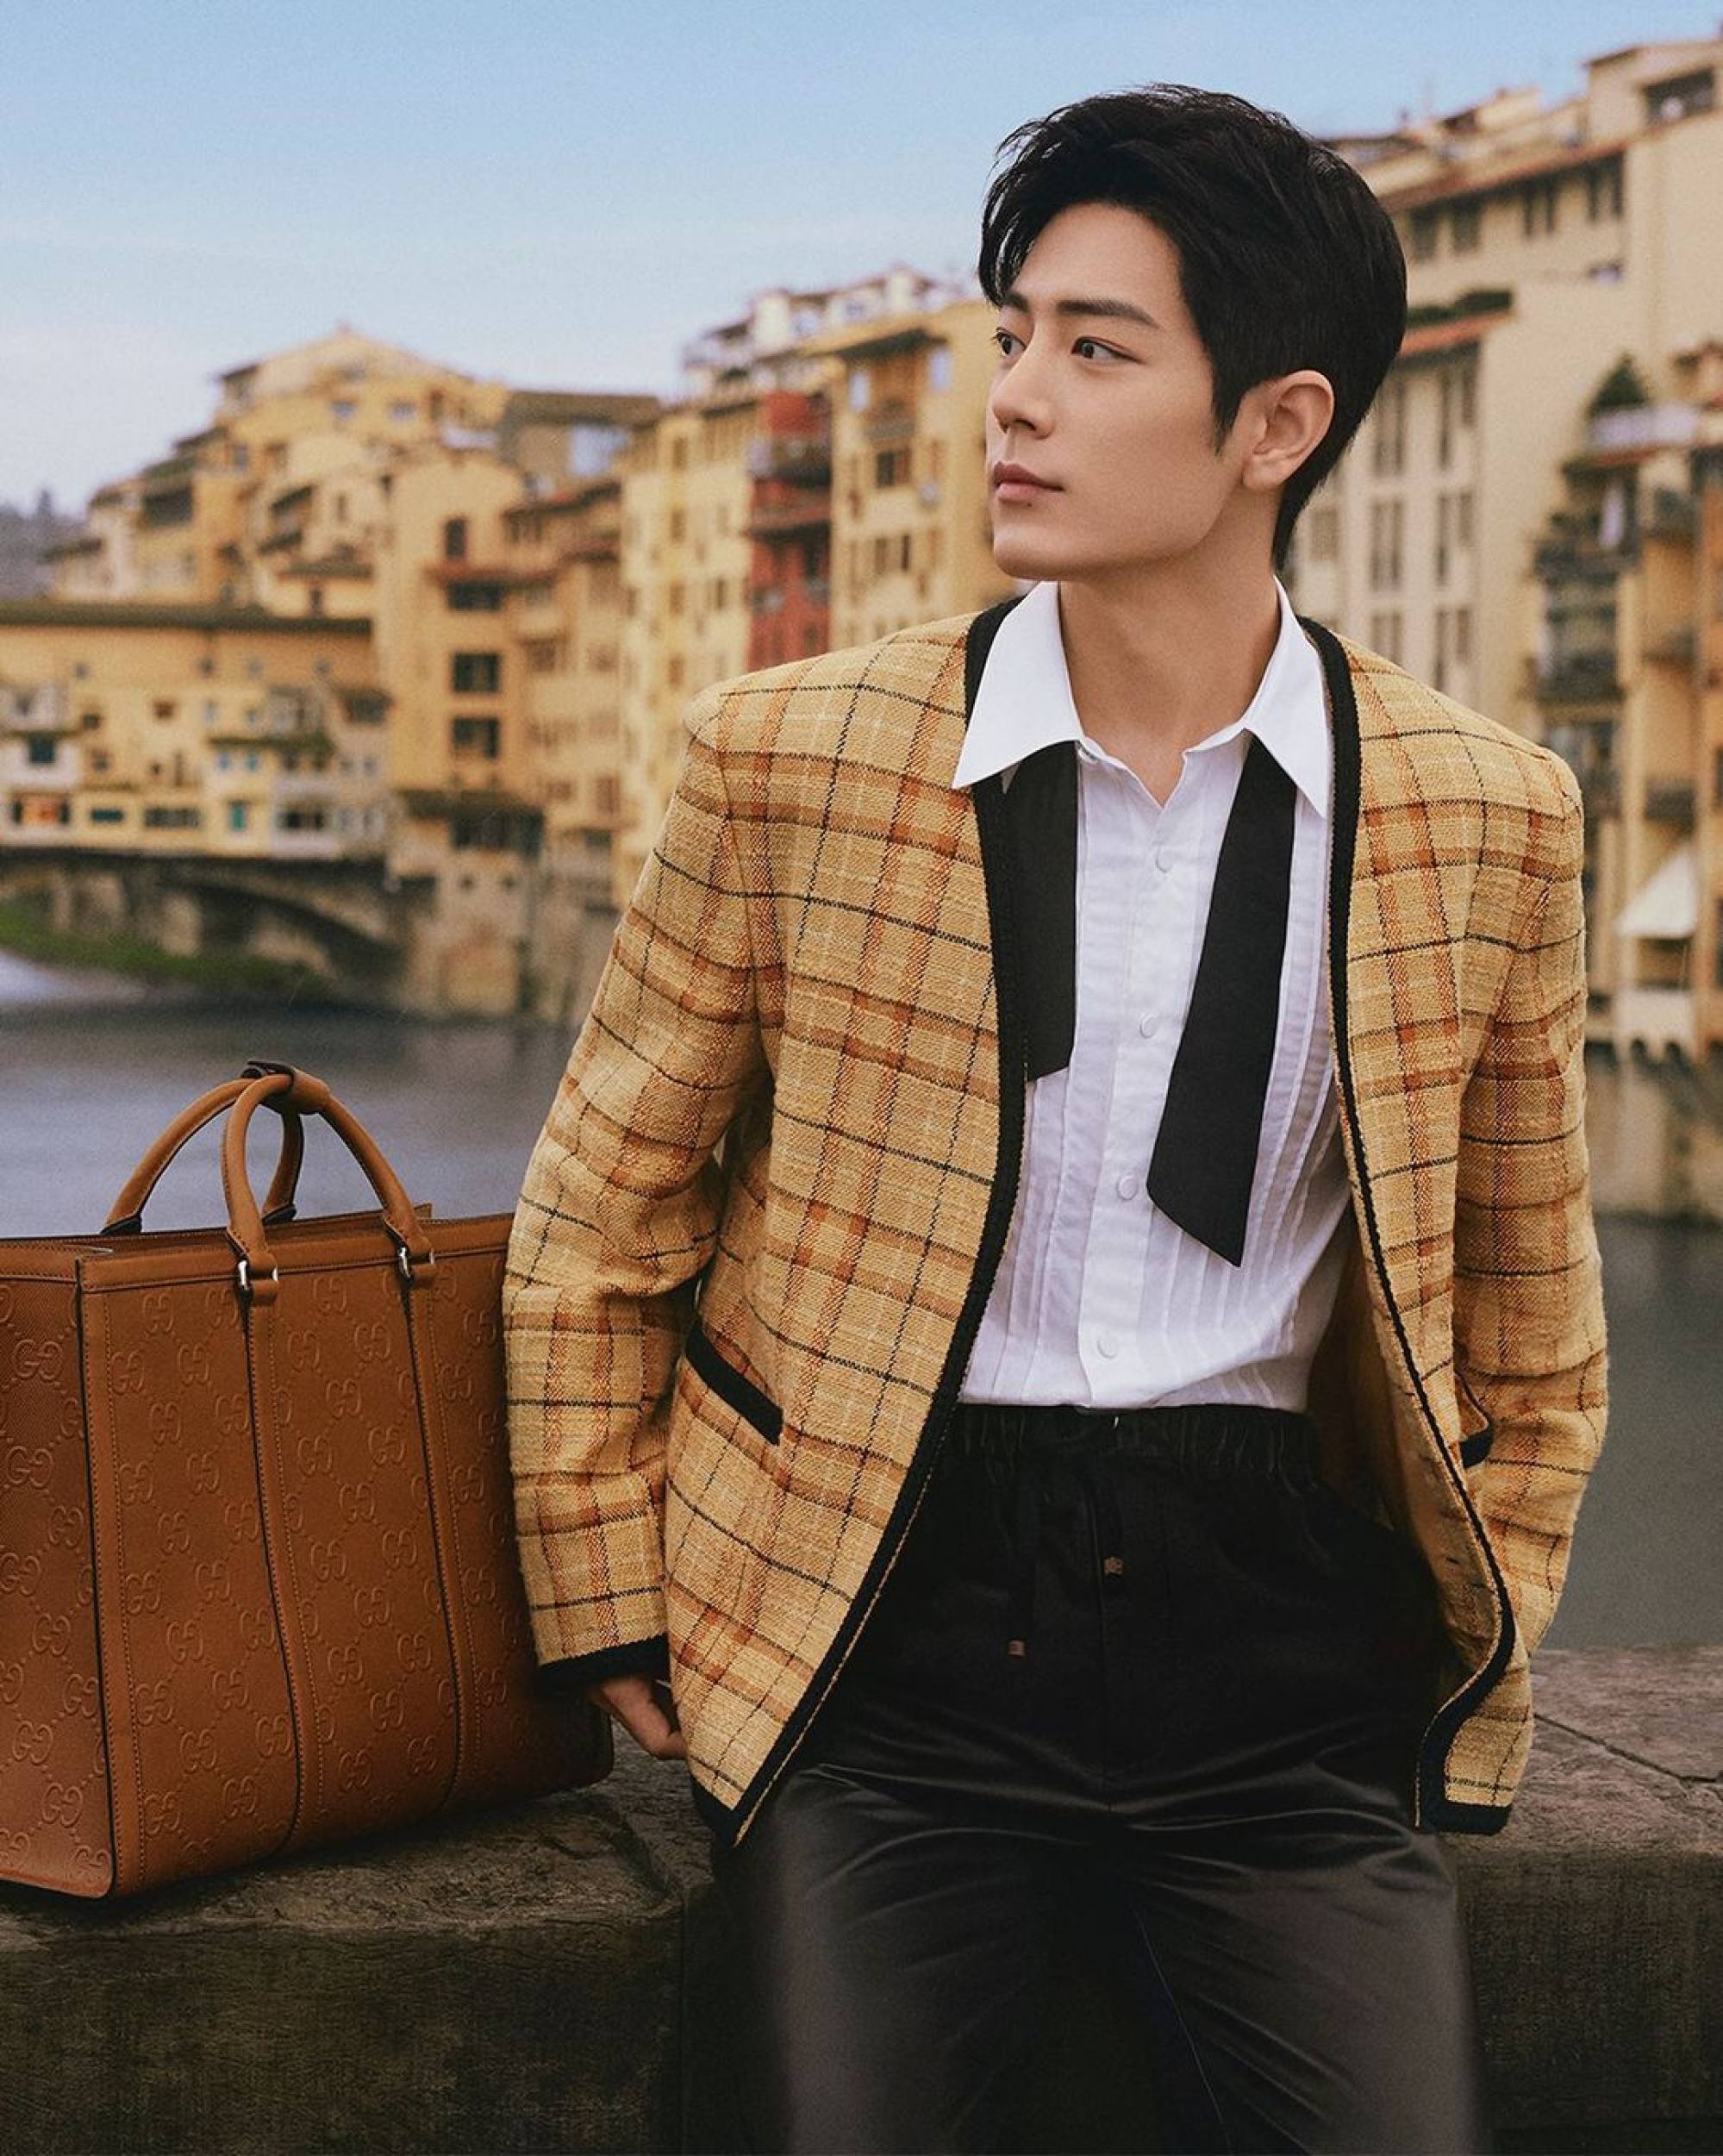 How Xiao Zhan became China’s ‘King of Luxury’ The Untamed actor and